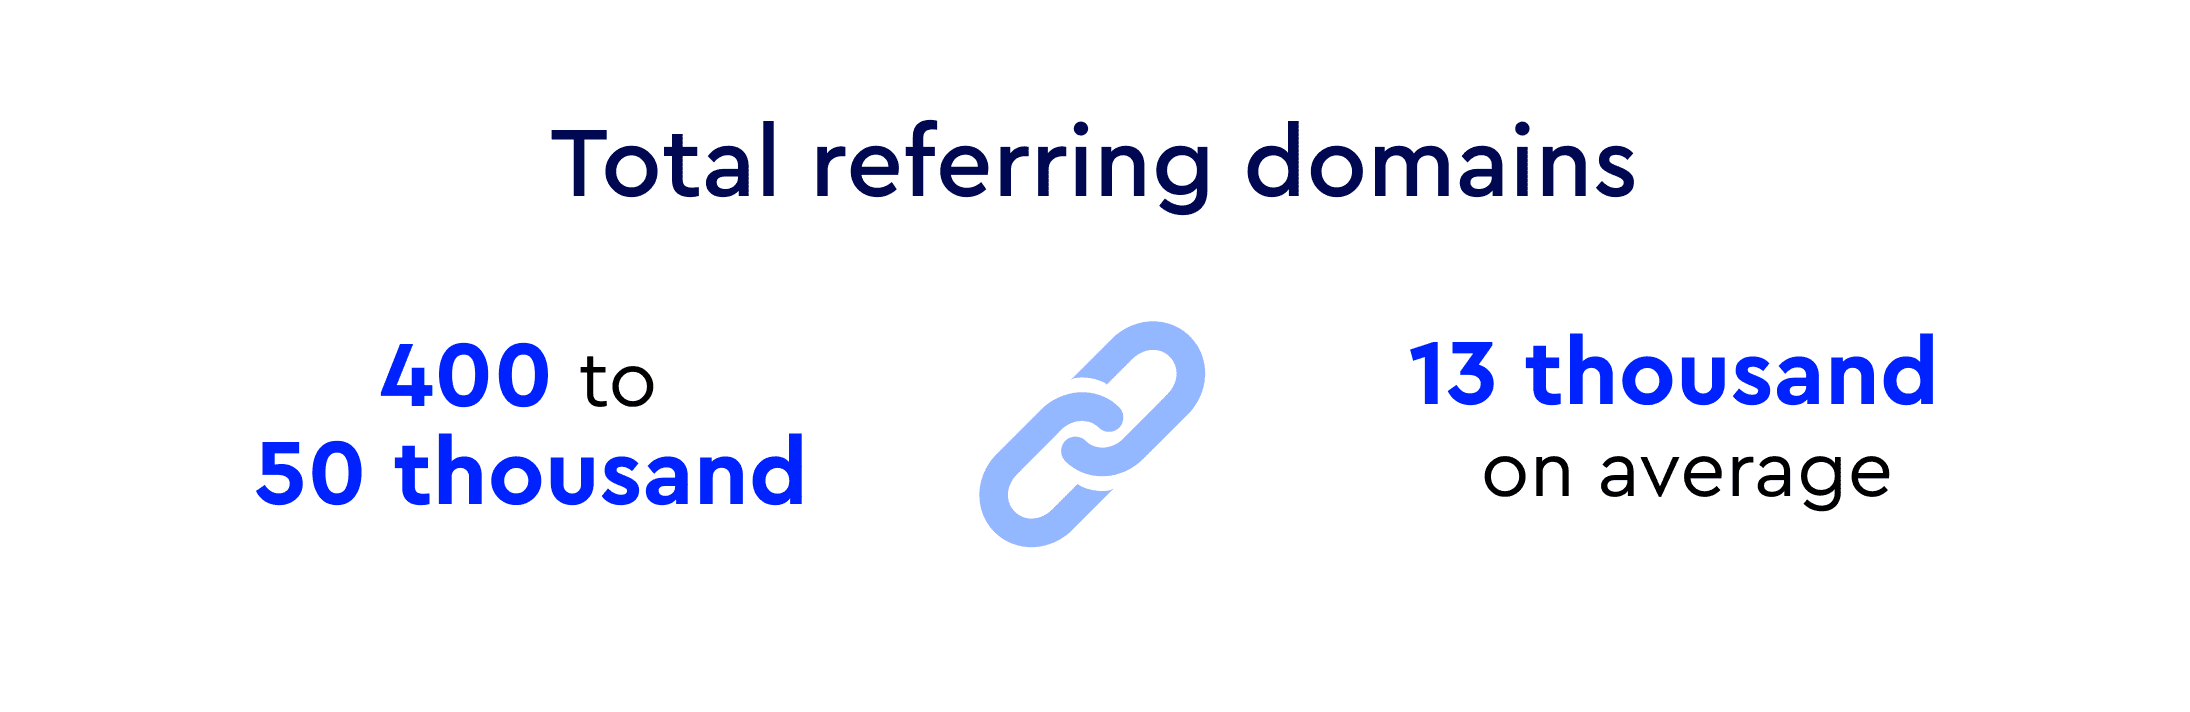 Total referring domains of the top Spanish ecommerce sites